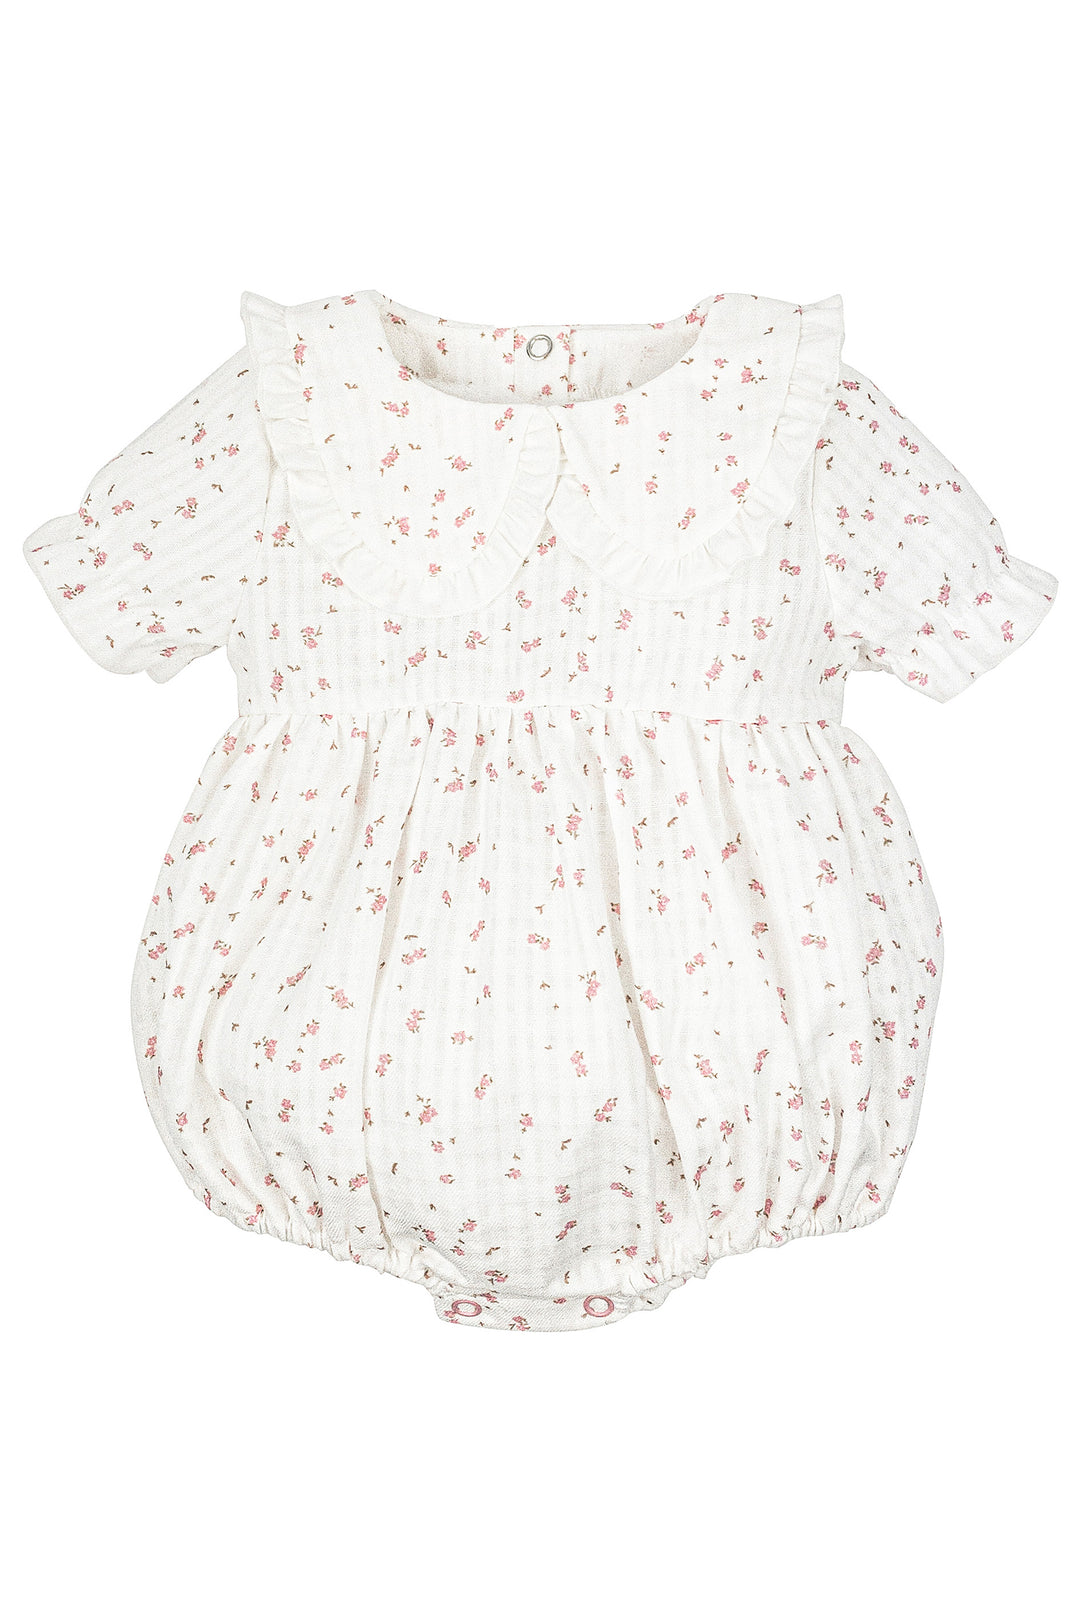 Jamiks "Bailey" Pink Floral Romper | Millie and John